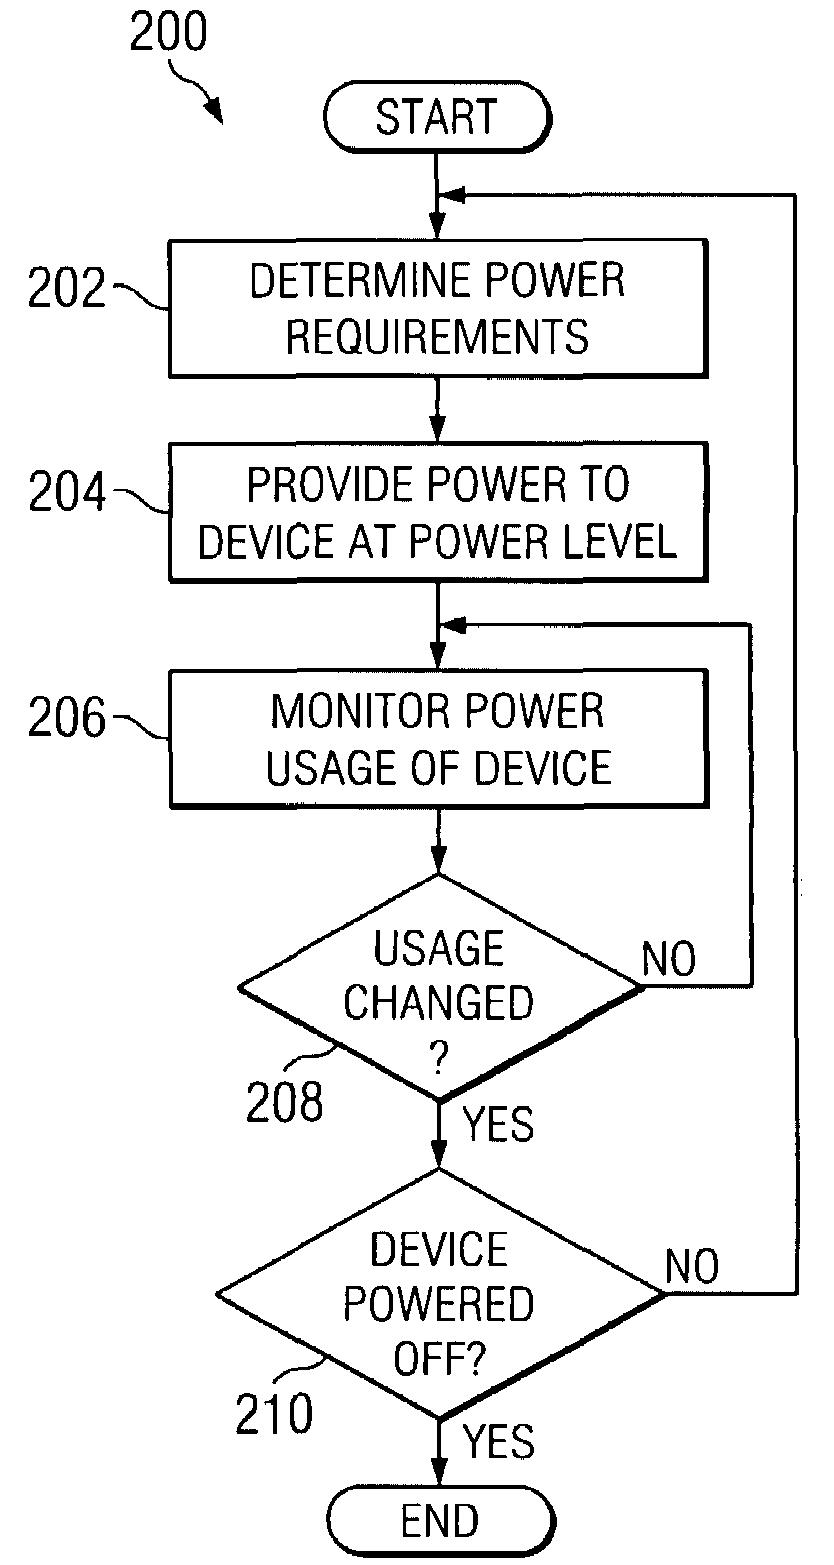 Power delivery over ethernet cables